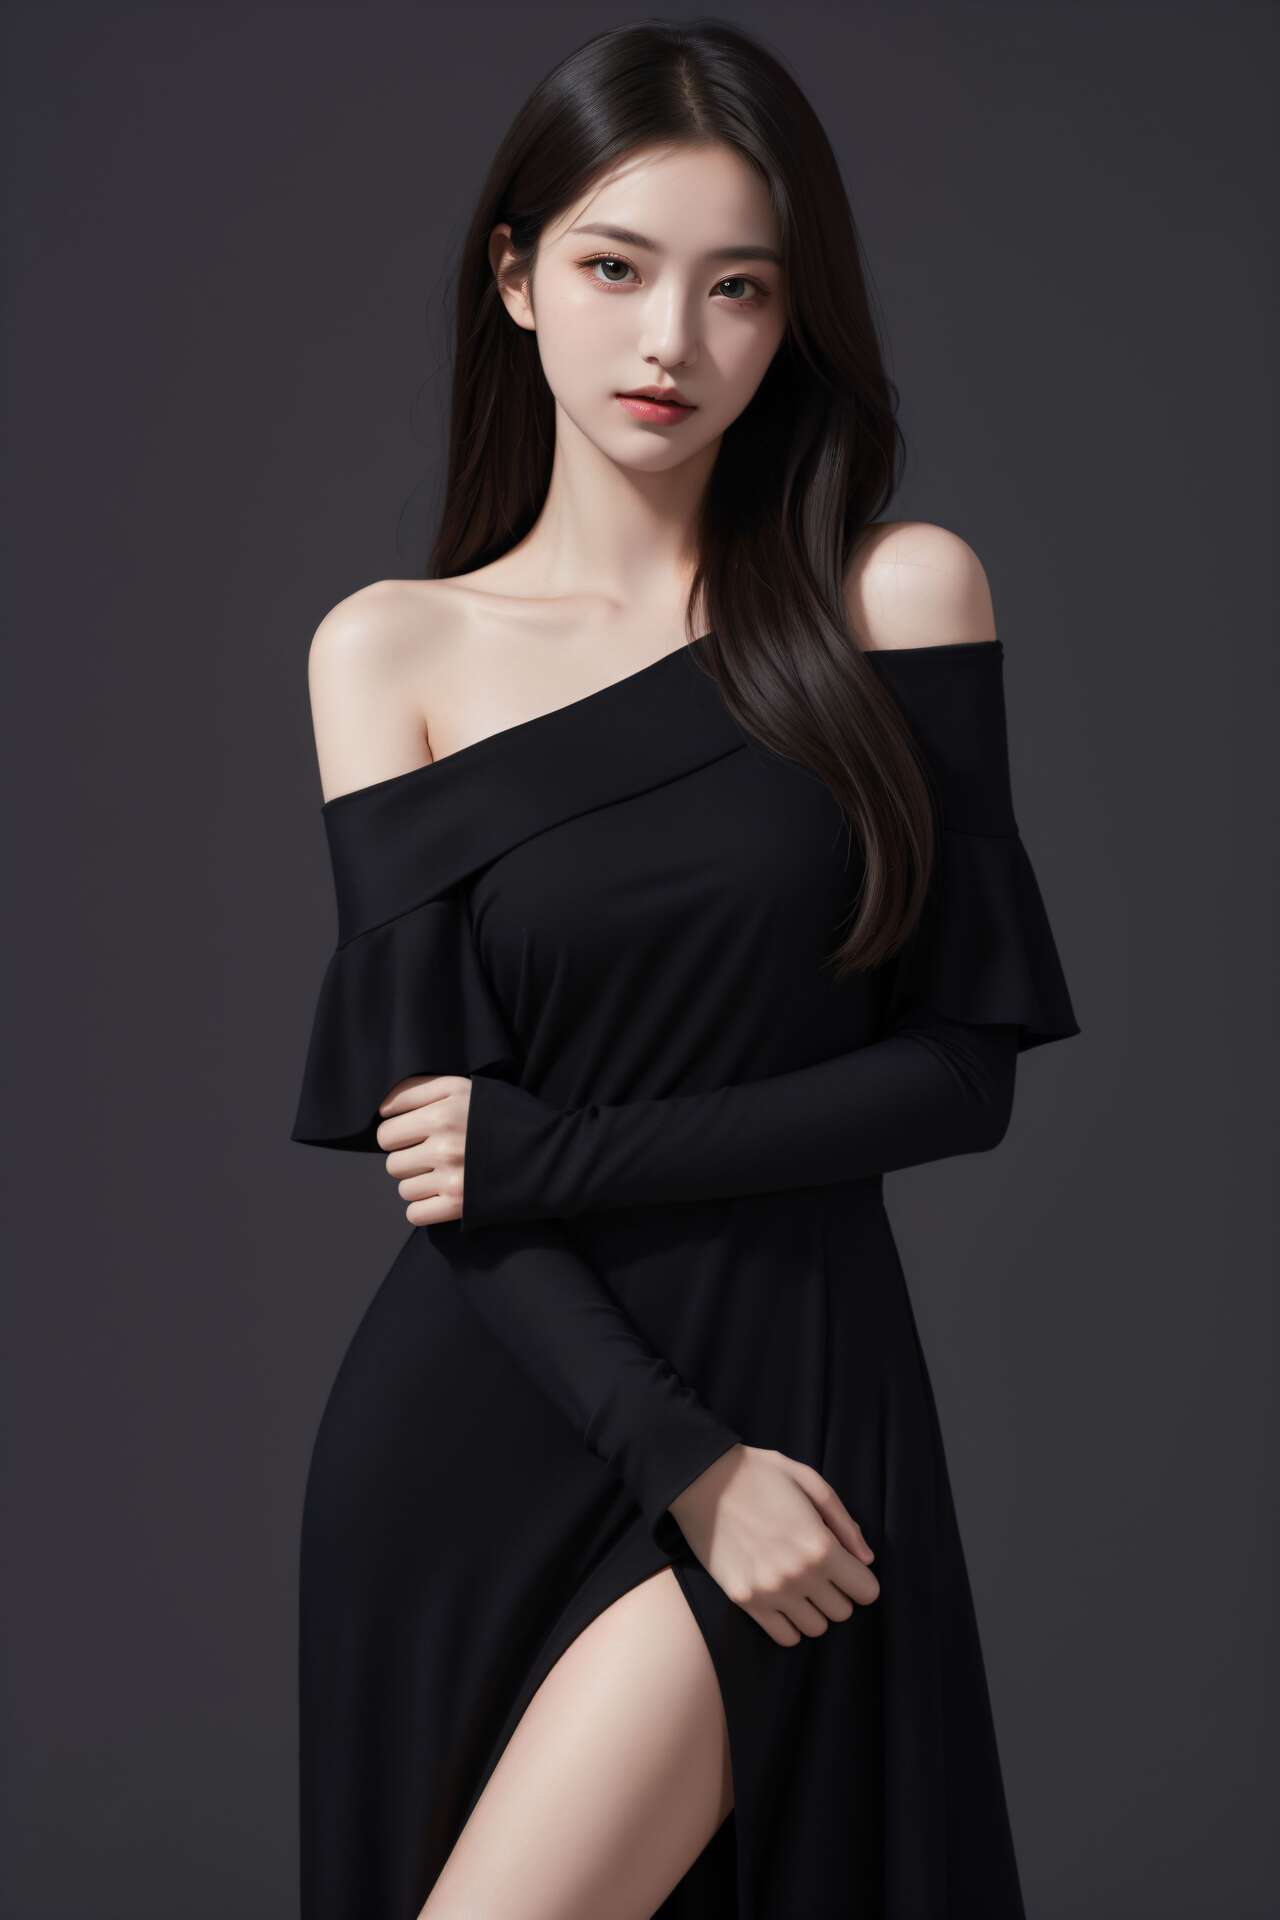 Pure and beautiful series photo style revealing black dressAI Generated 1